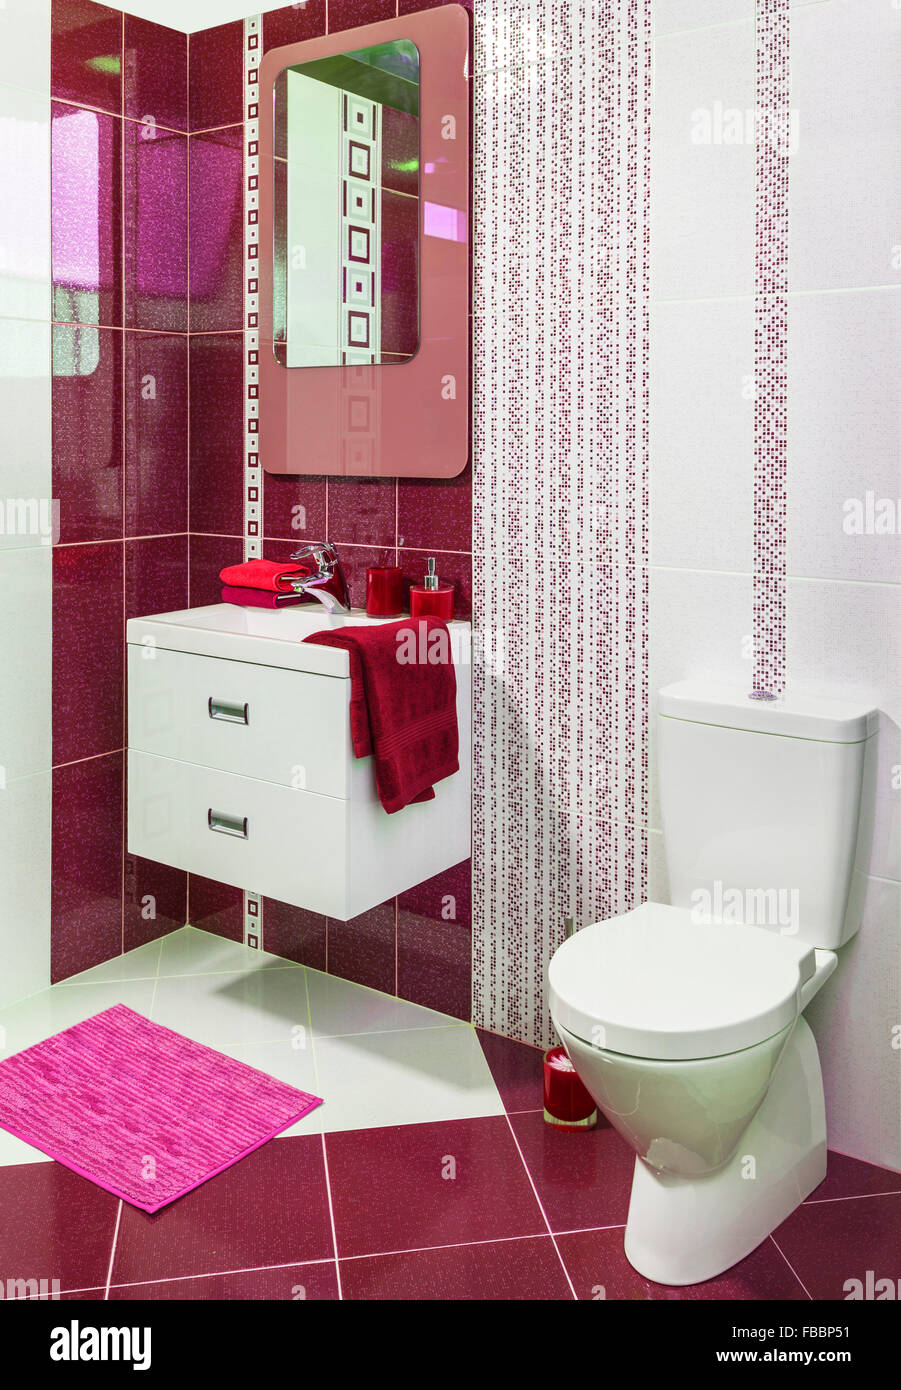 luxury modern style decorated toilet with red tiles Stock Photo